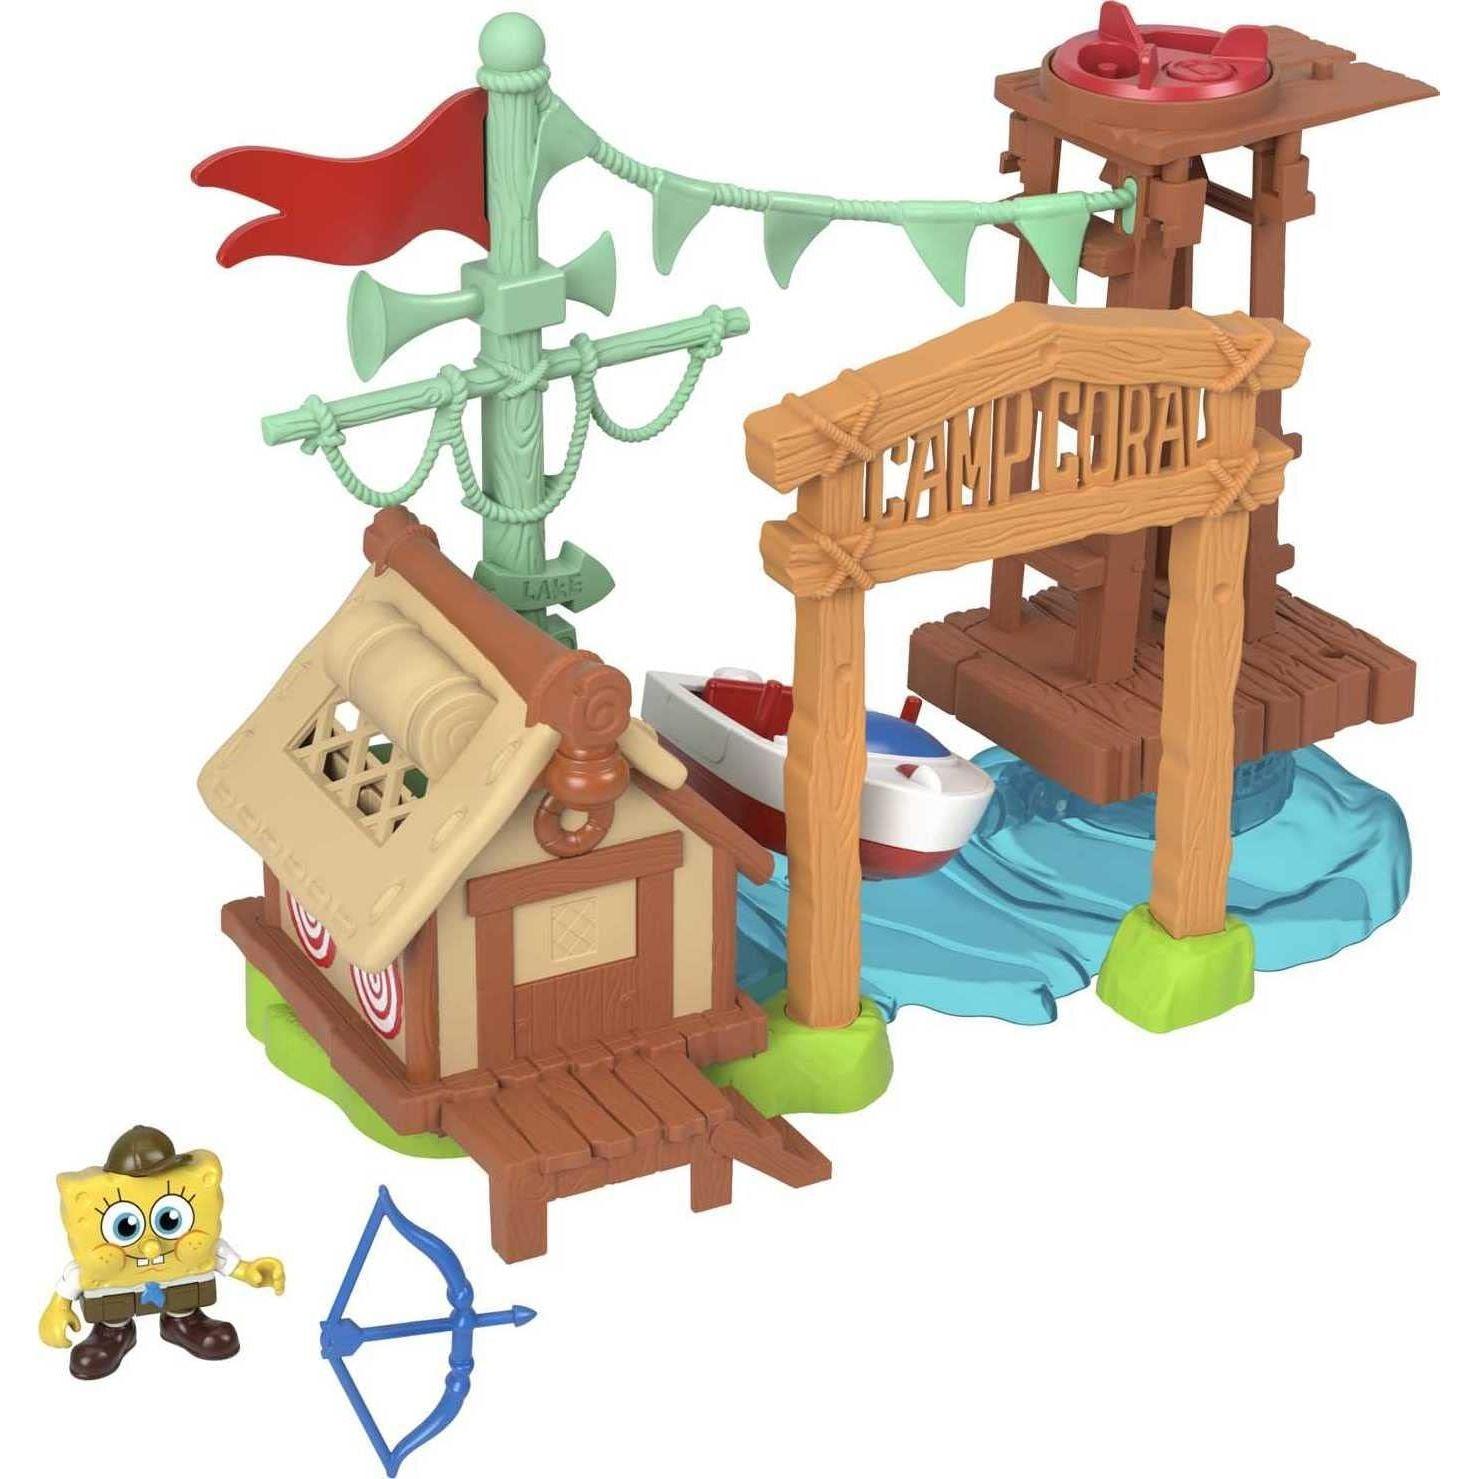 Imaginext Spongebob Playset, Camp Coral, Campground with Character Figure and Play Pieces for Preschool Pretend Play 3+ Years